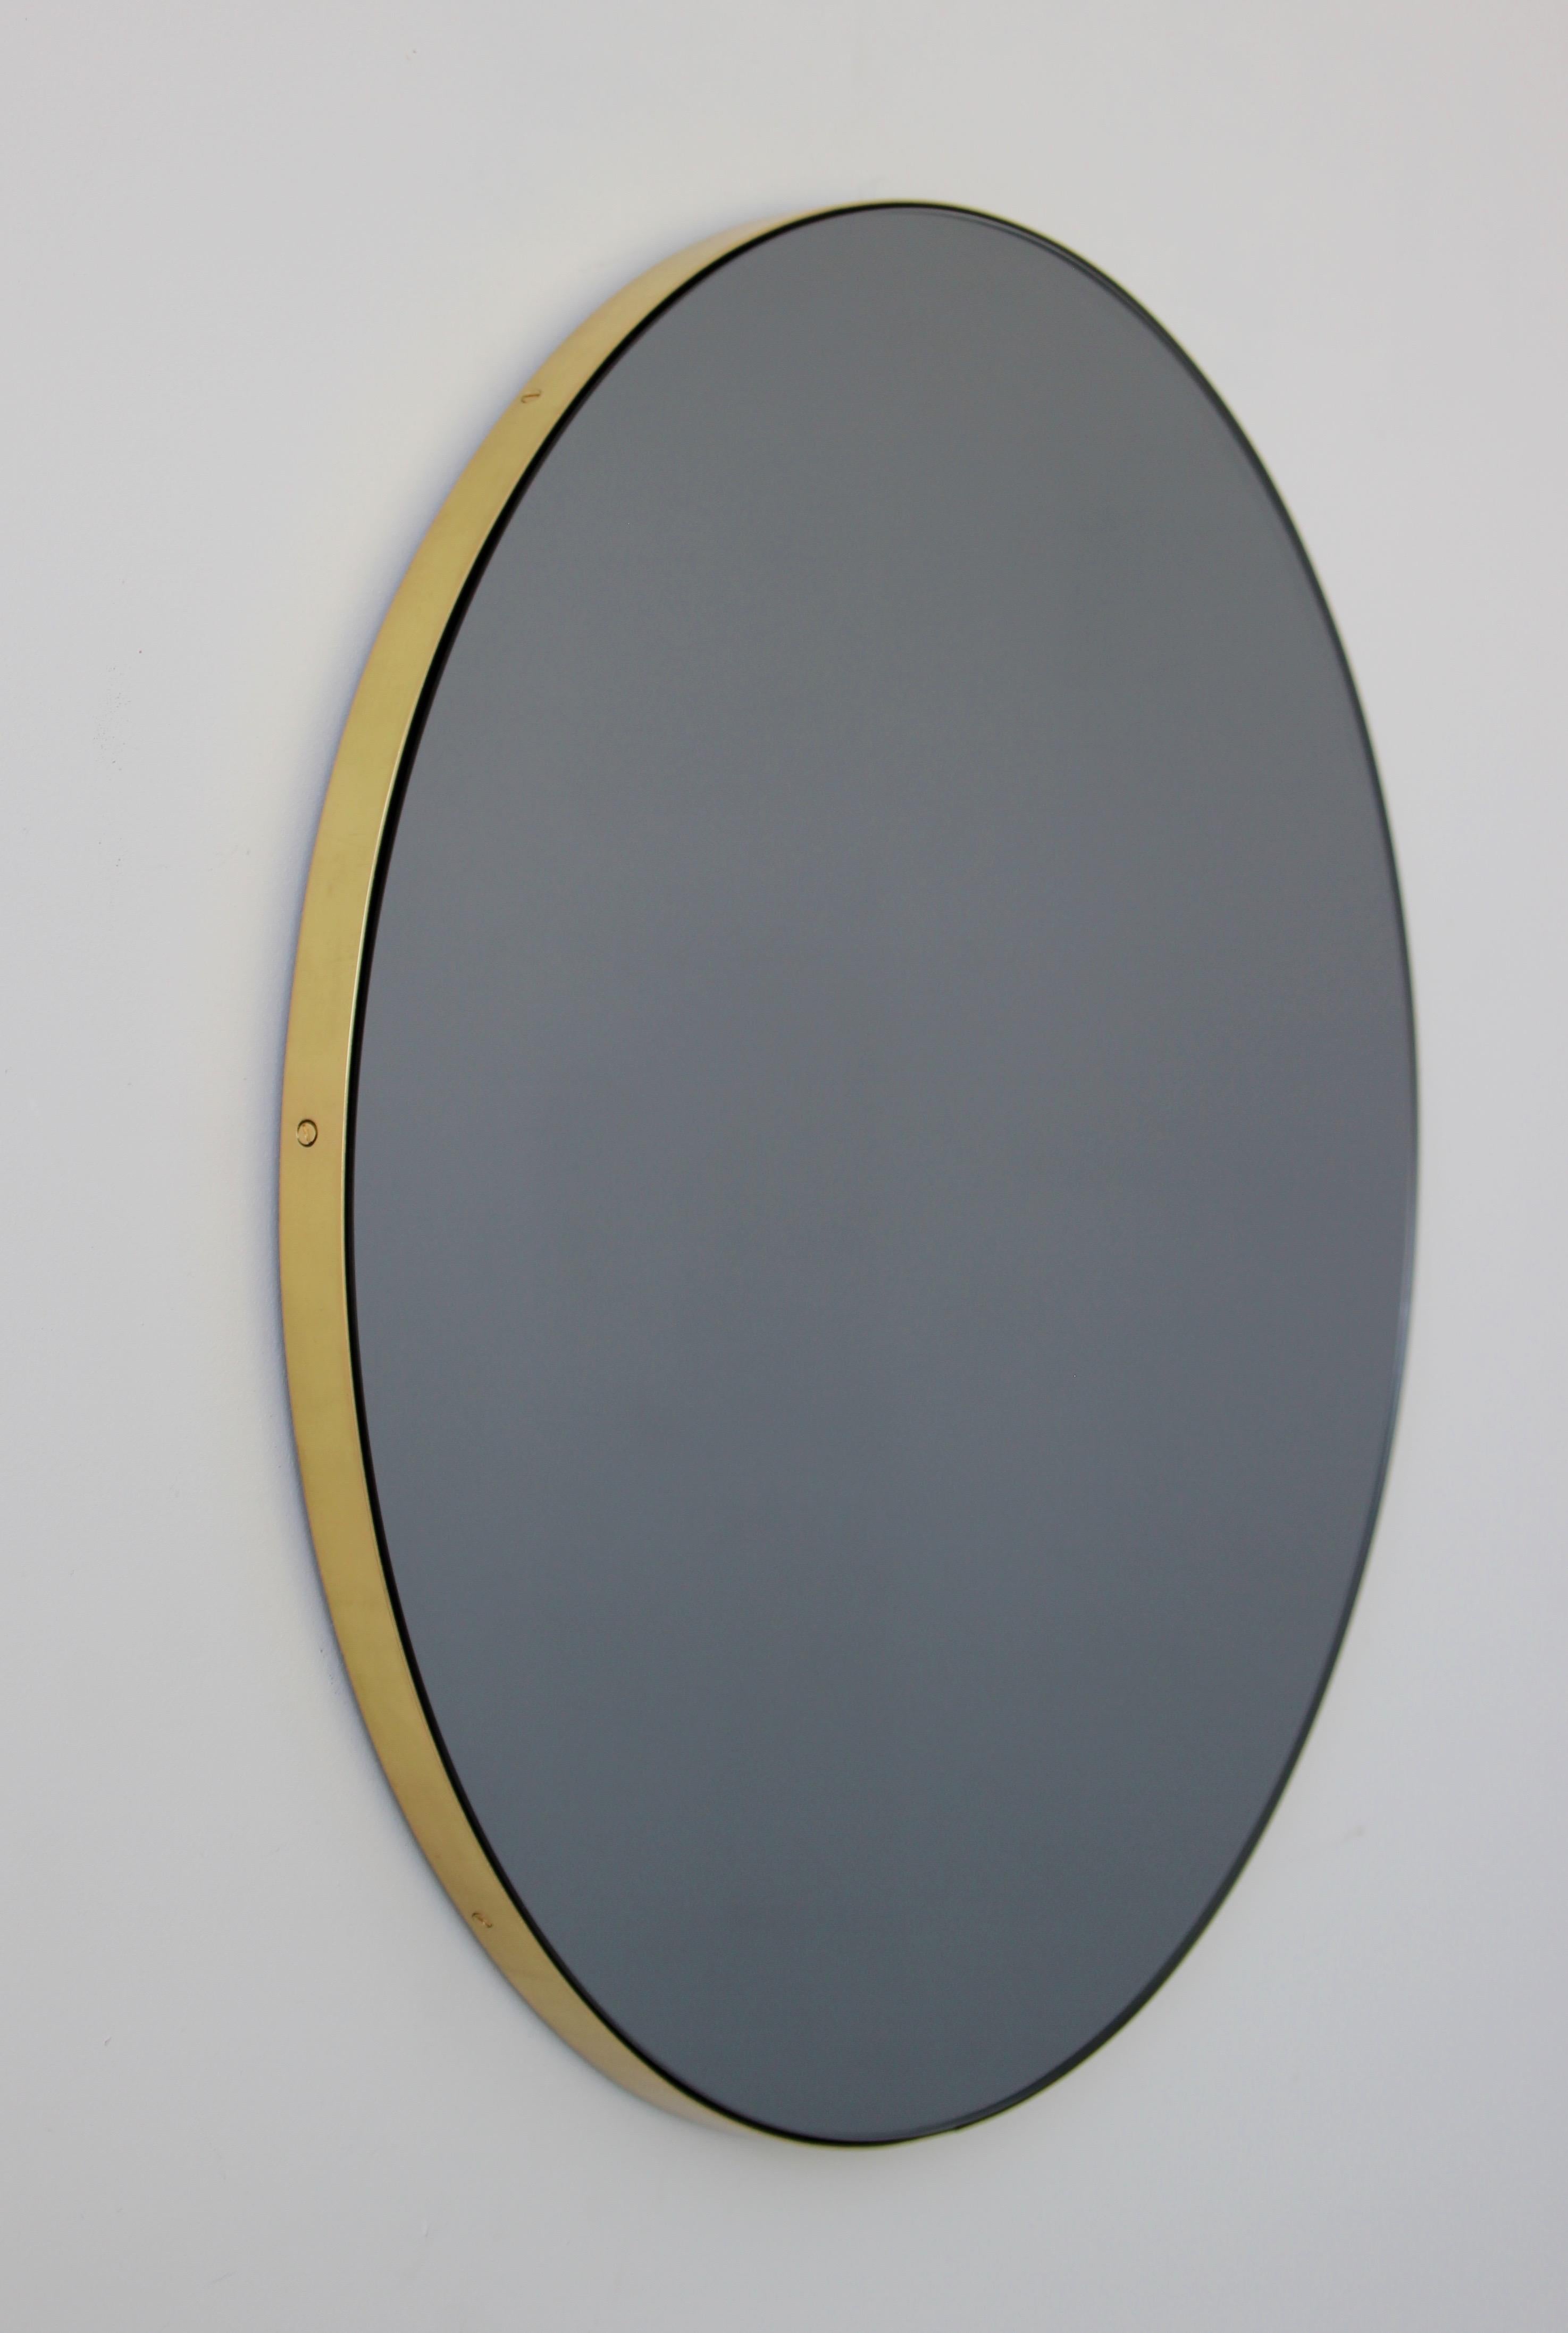 Brushed Orbis Black Tinted Round Contemporary Mirror with a Brass Frame, Small For Sale